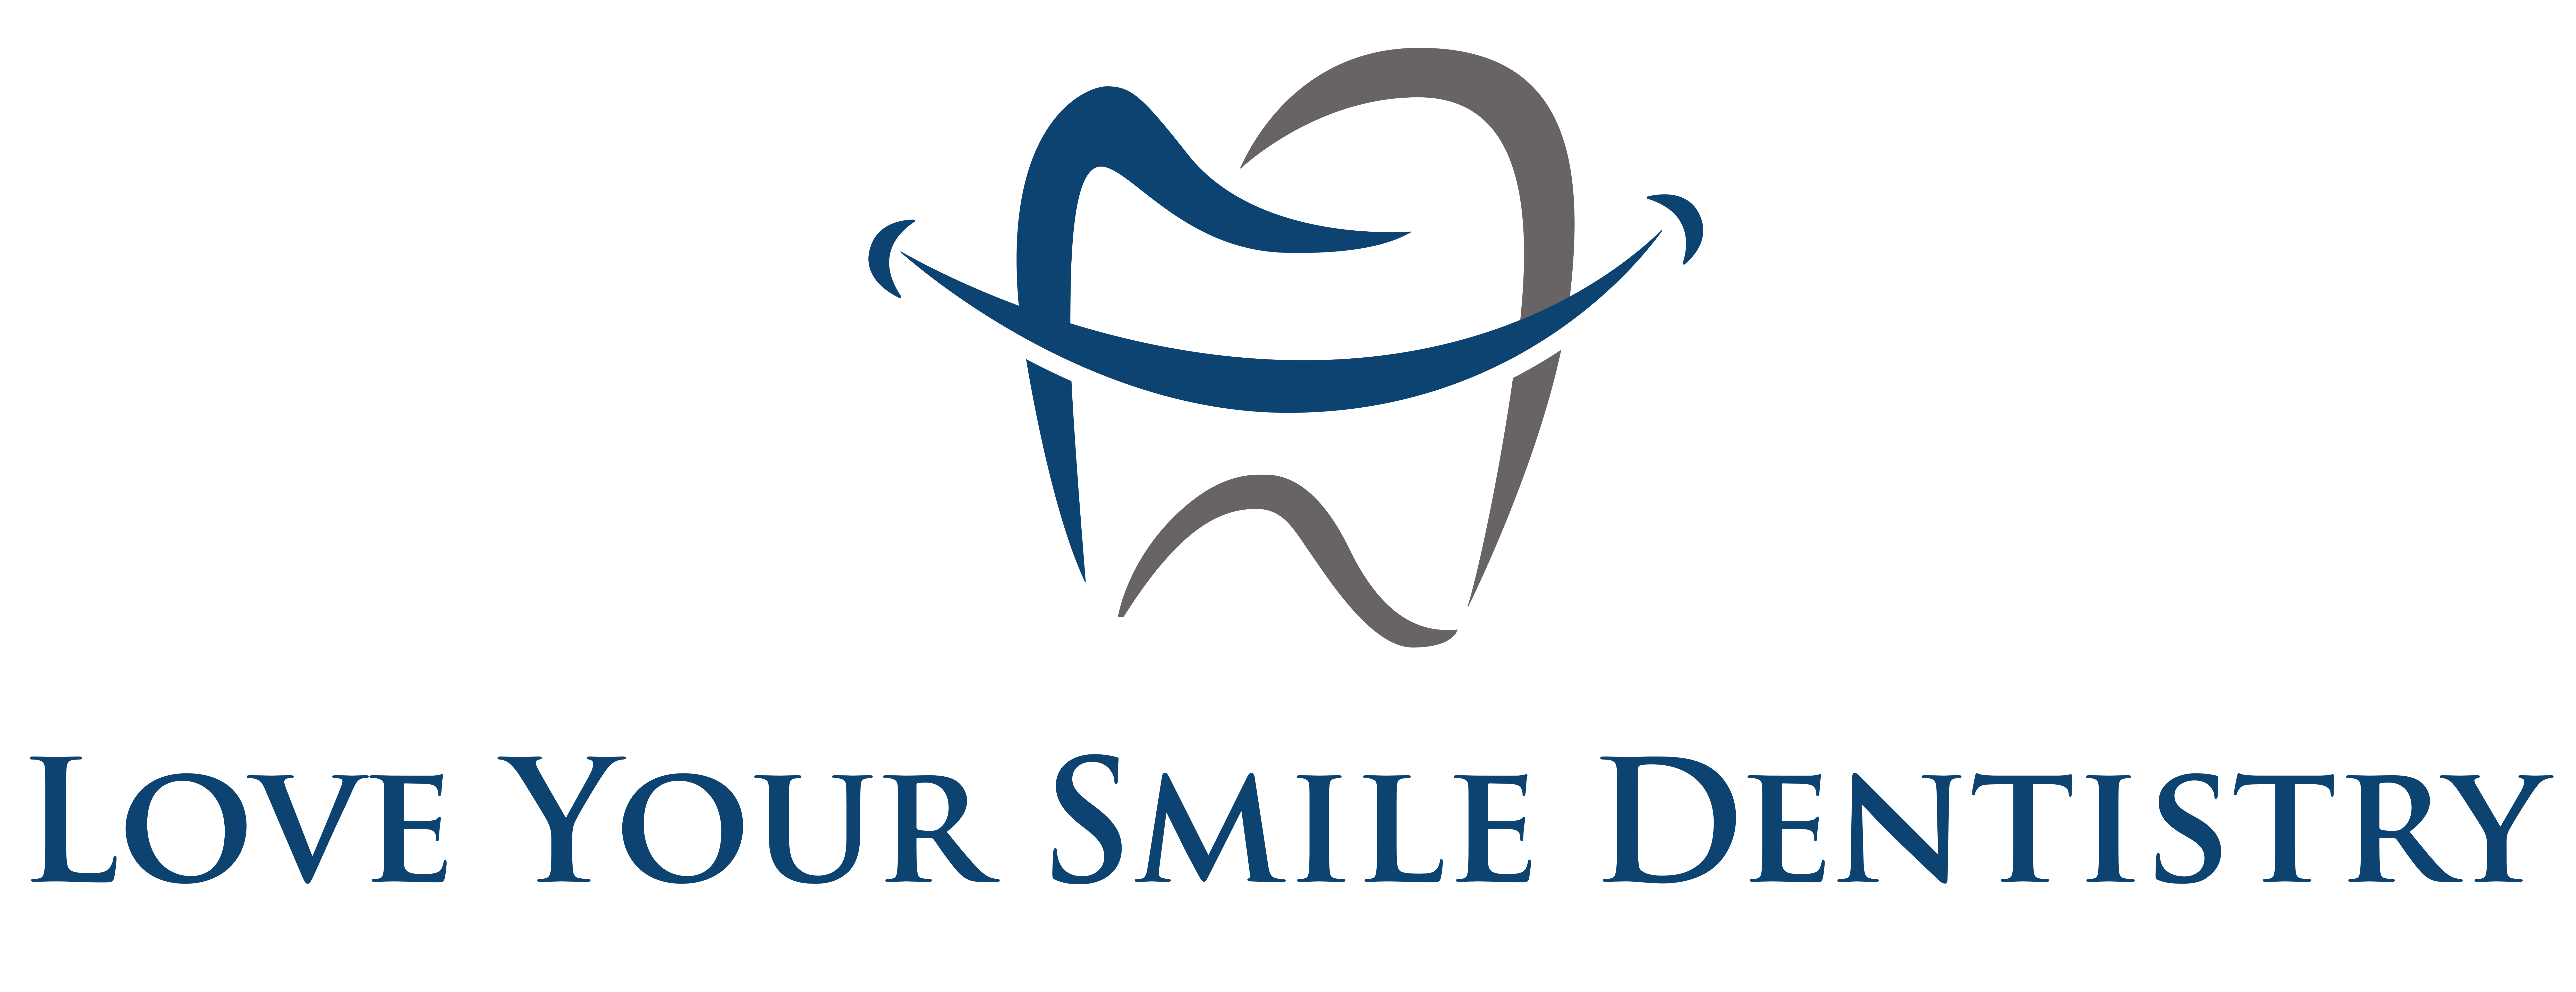 LOVE YOUR SMILE DENTISTRY